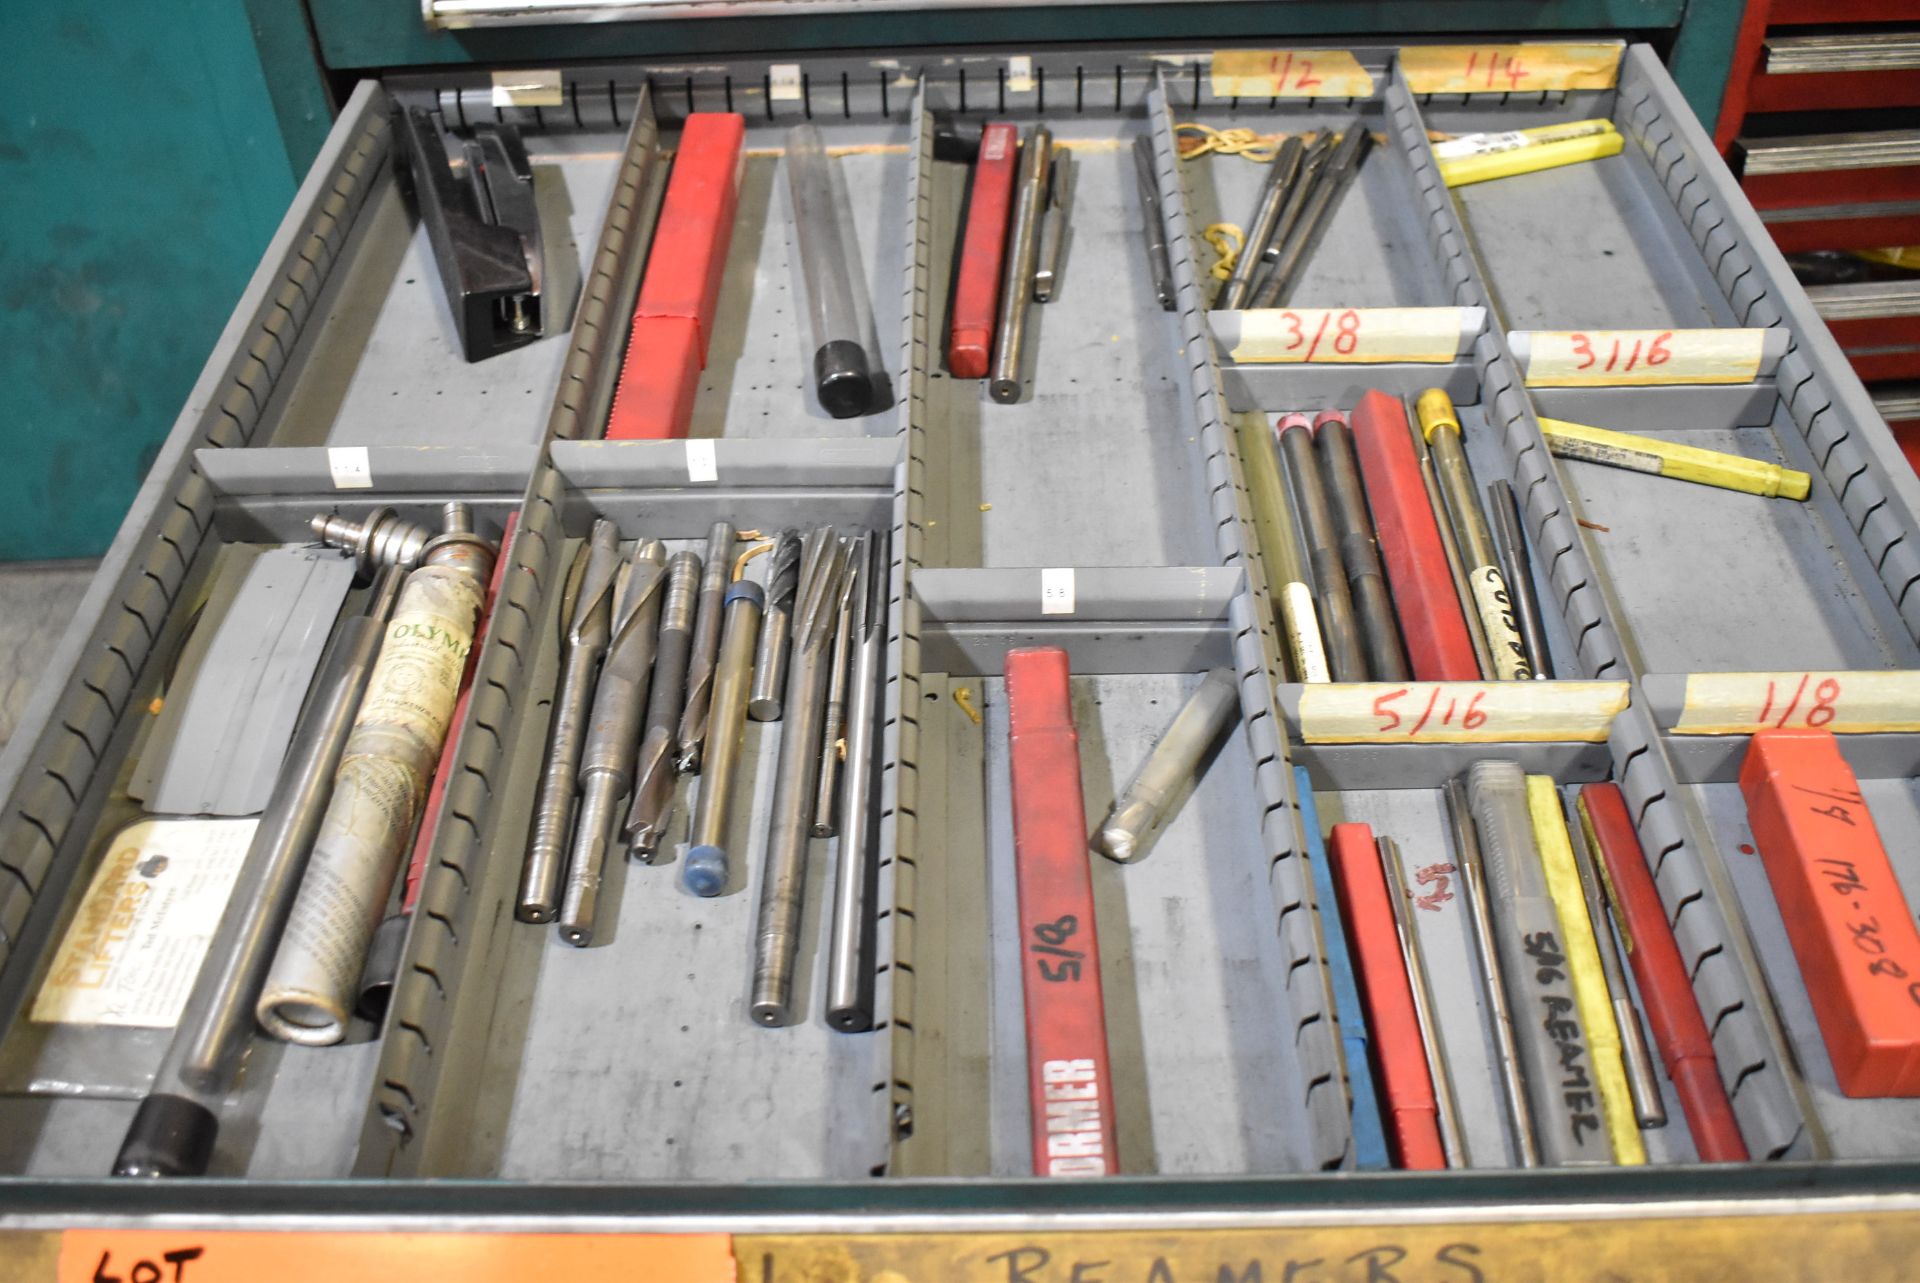 LOT/ CONTENTS OF TOOL CABINET - INCLUDING TAPS, REAMERS, DRILLS, SANDING & GRINDING PERISHABLES, - Image 3 of 10